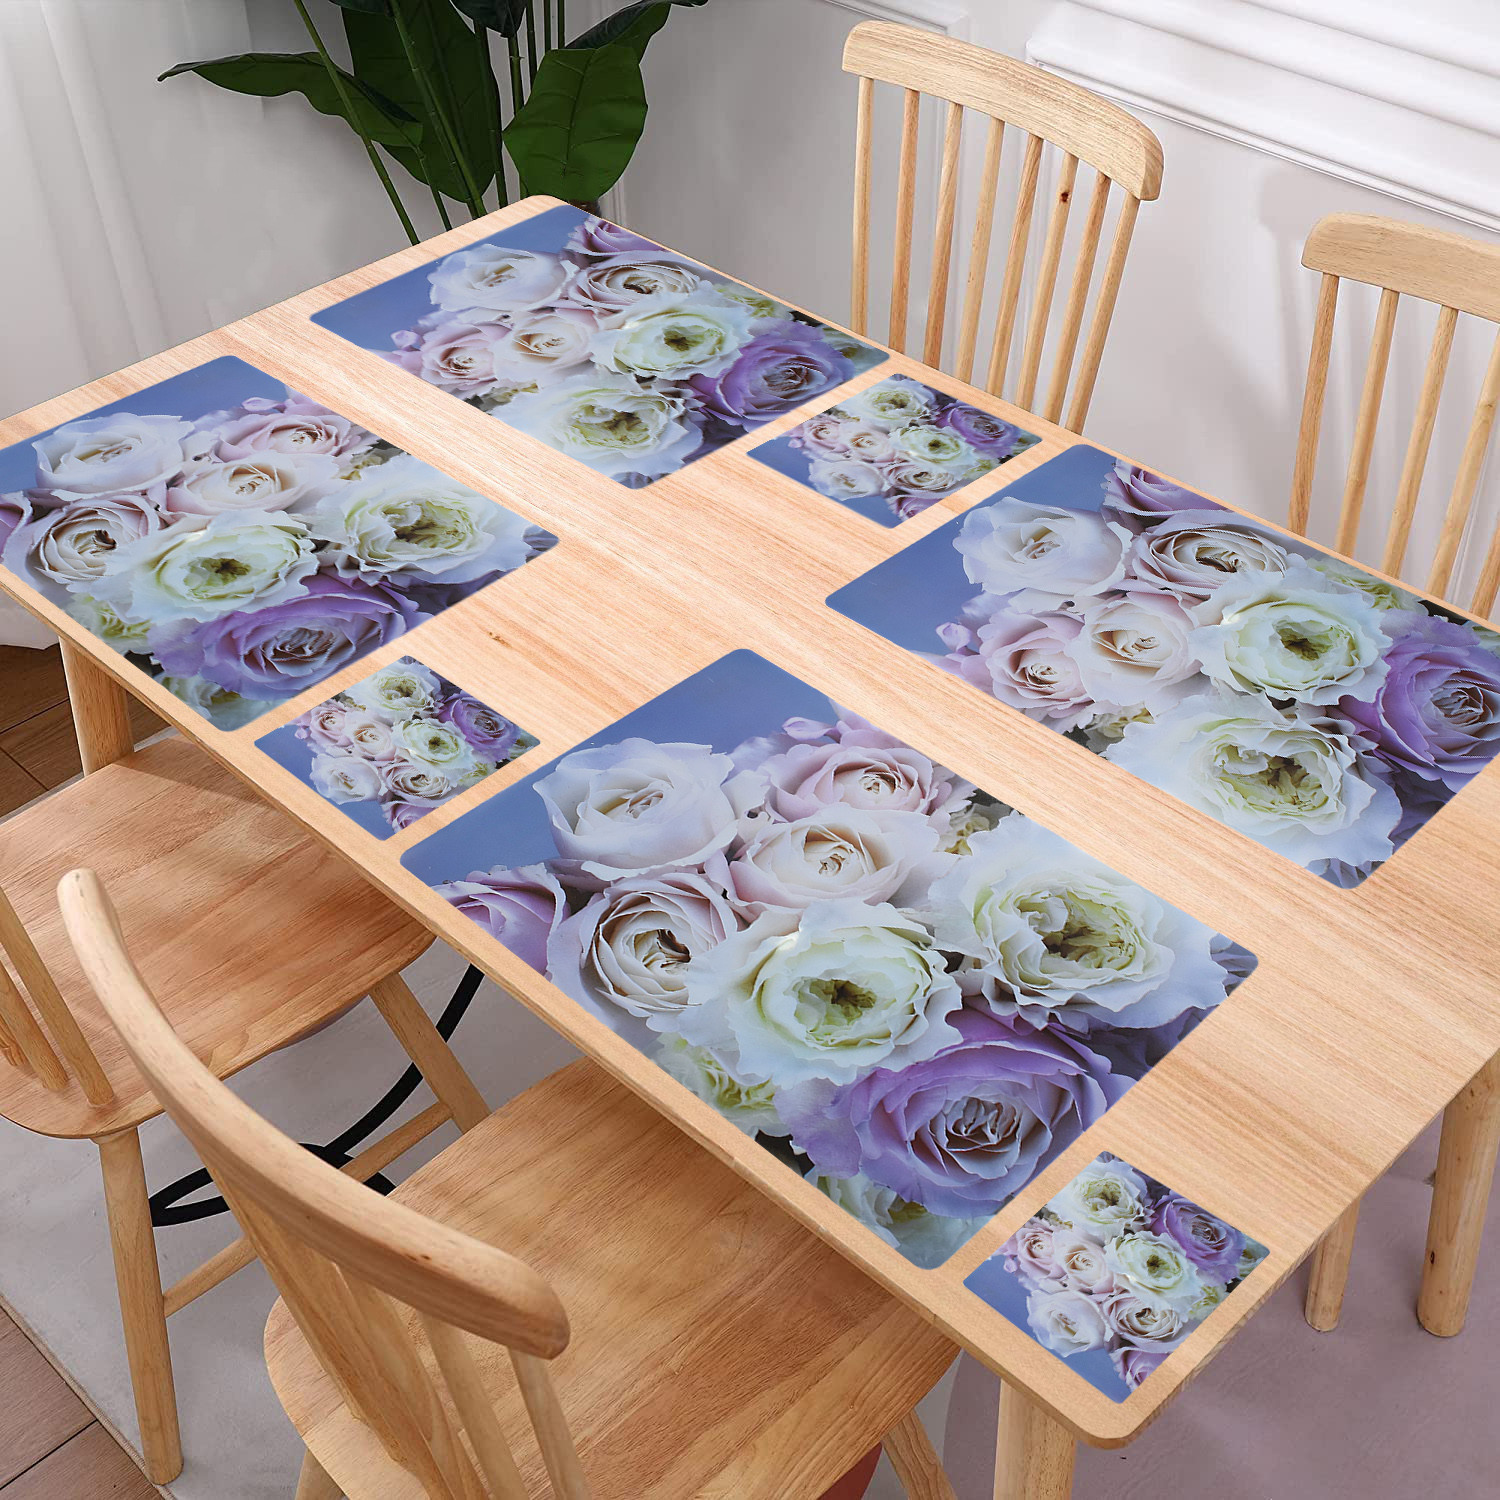 Kuber Industries Table Mat | PVC Flower Print Dining Table Mats | 6 Pieces Table Placemats Set with Tea Coasters | Washable Placemats for Home | Kitchen | Blue